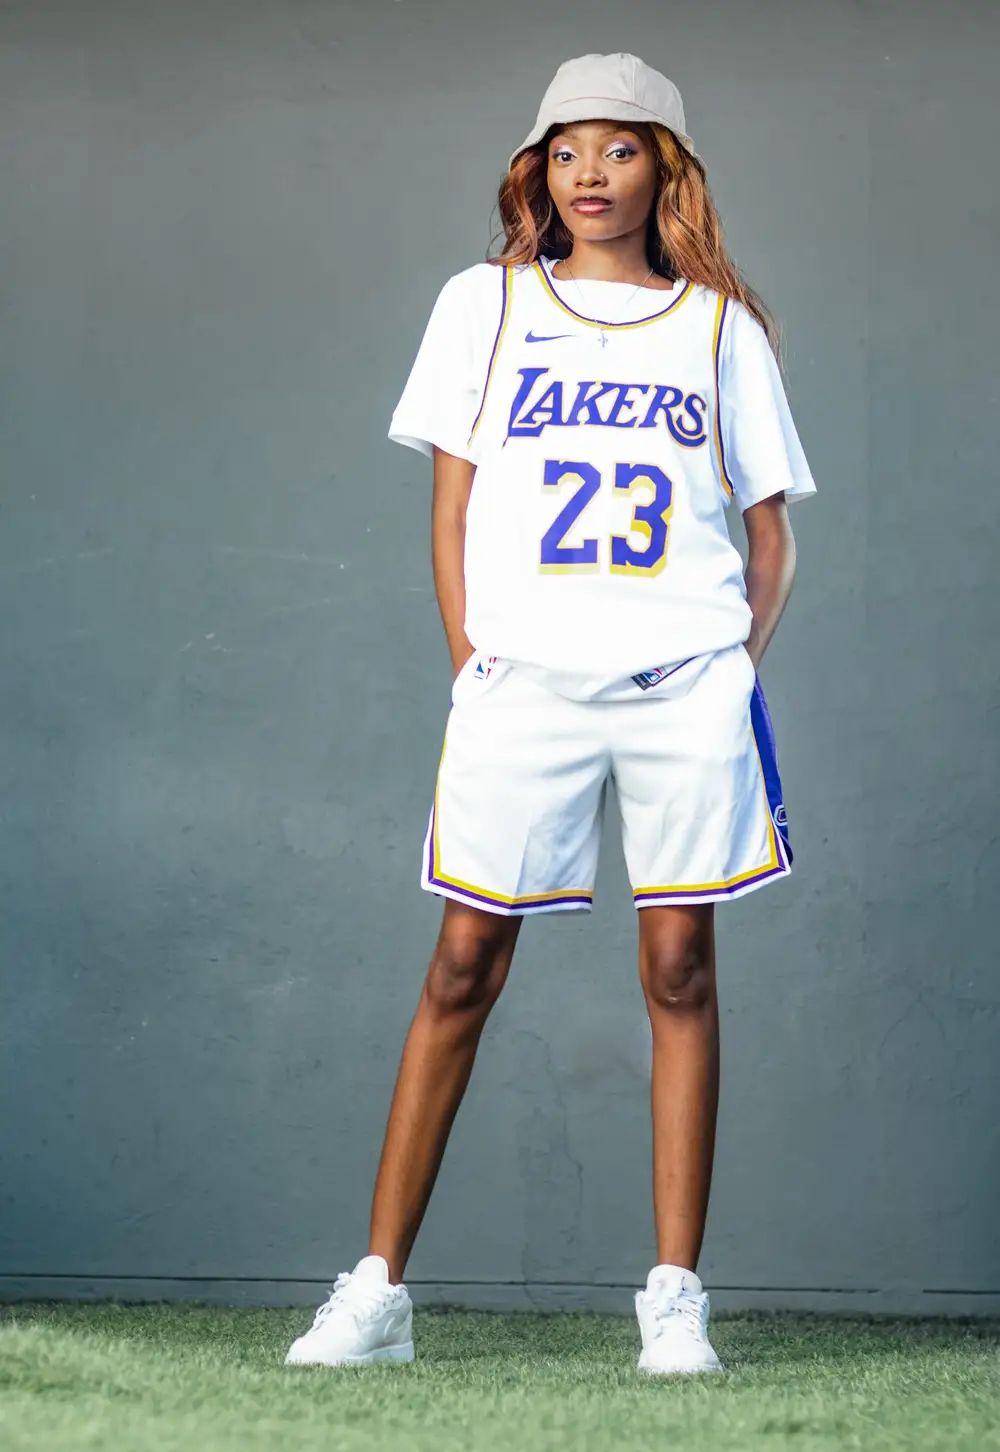 Beautiful lady in a Lakers jersey